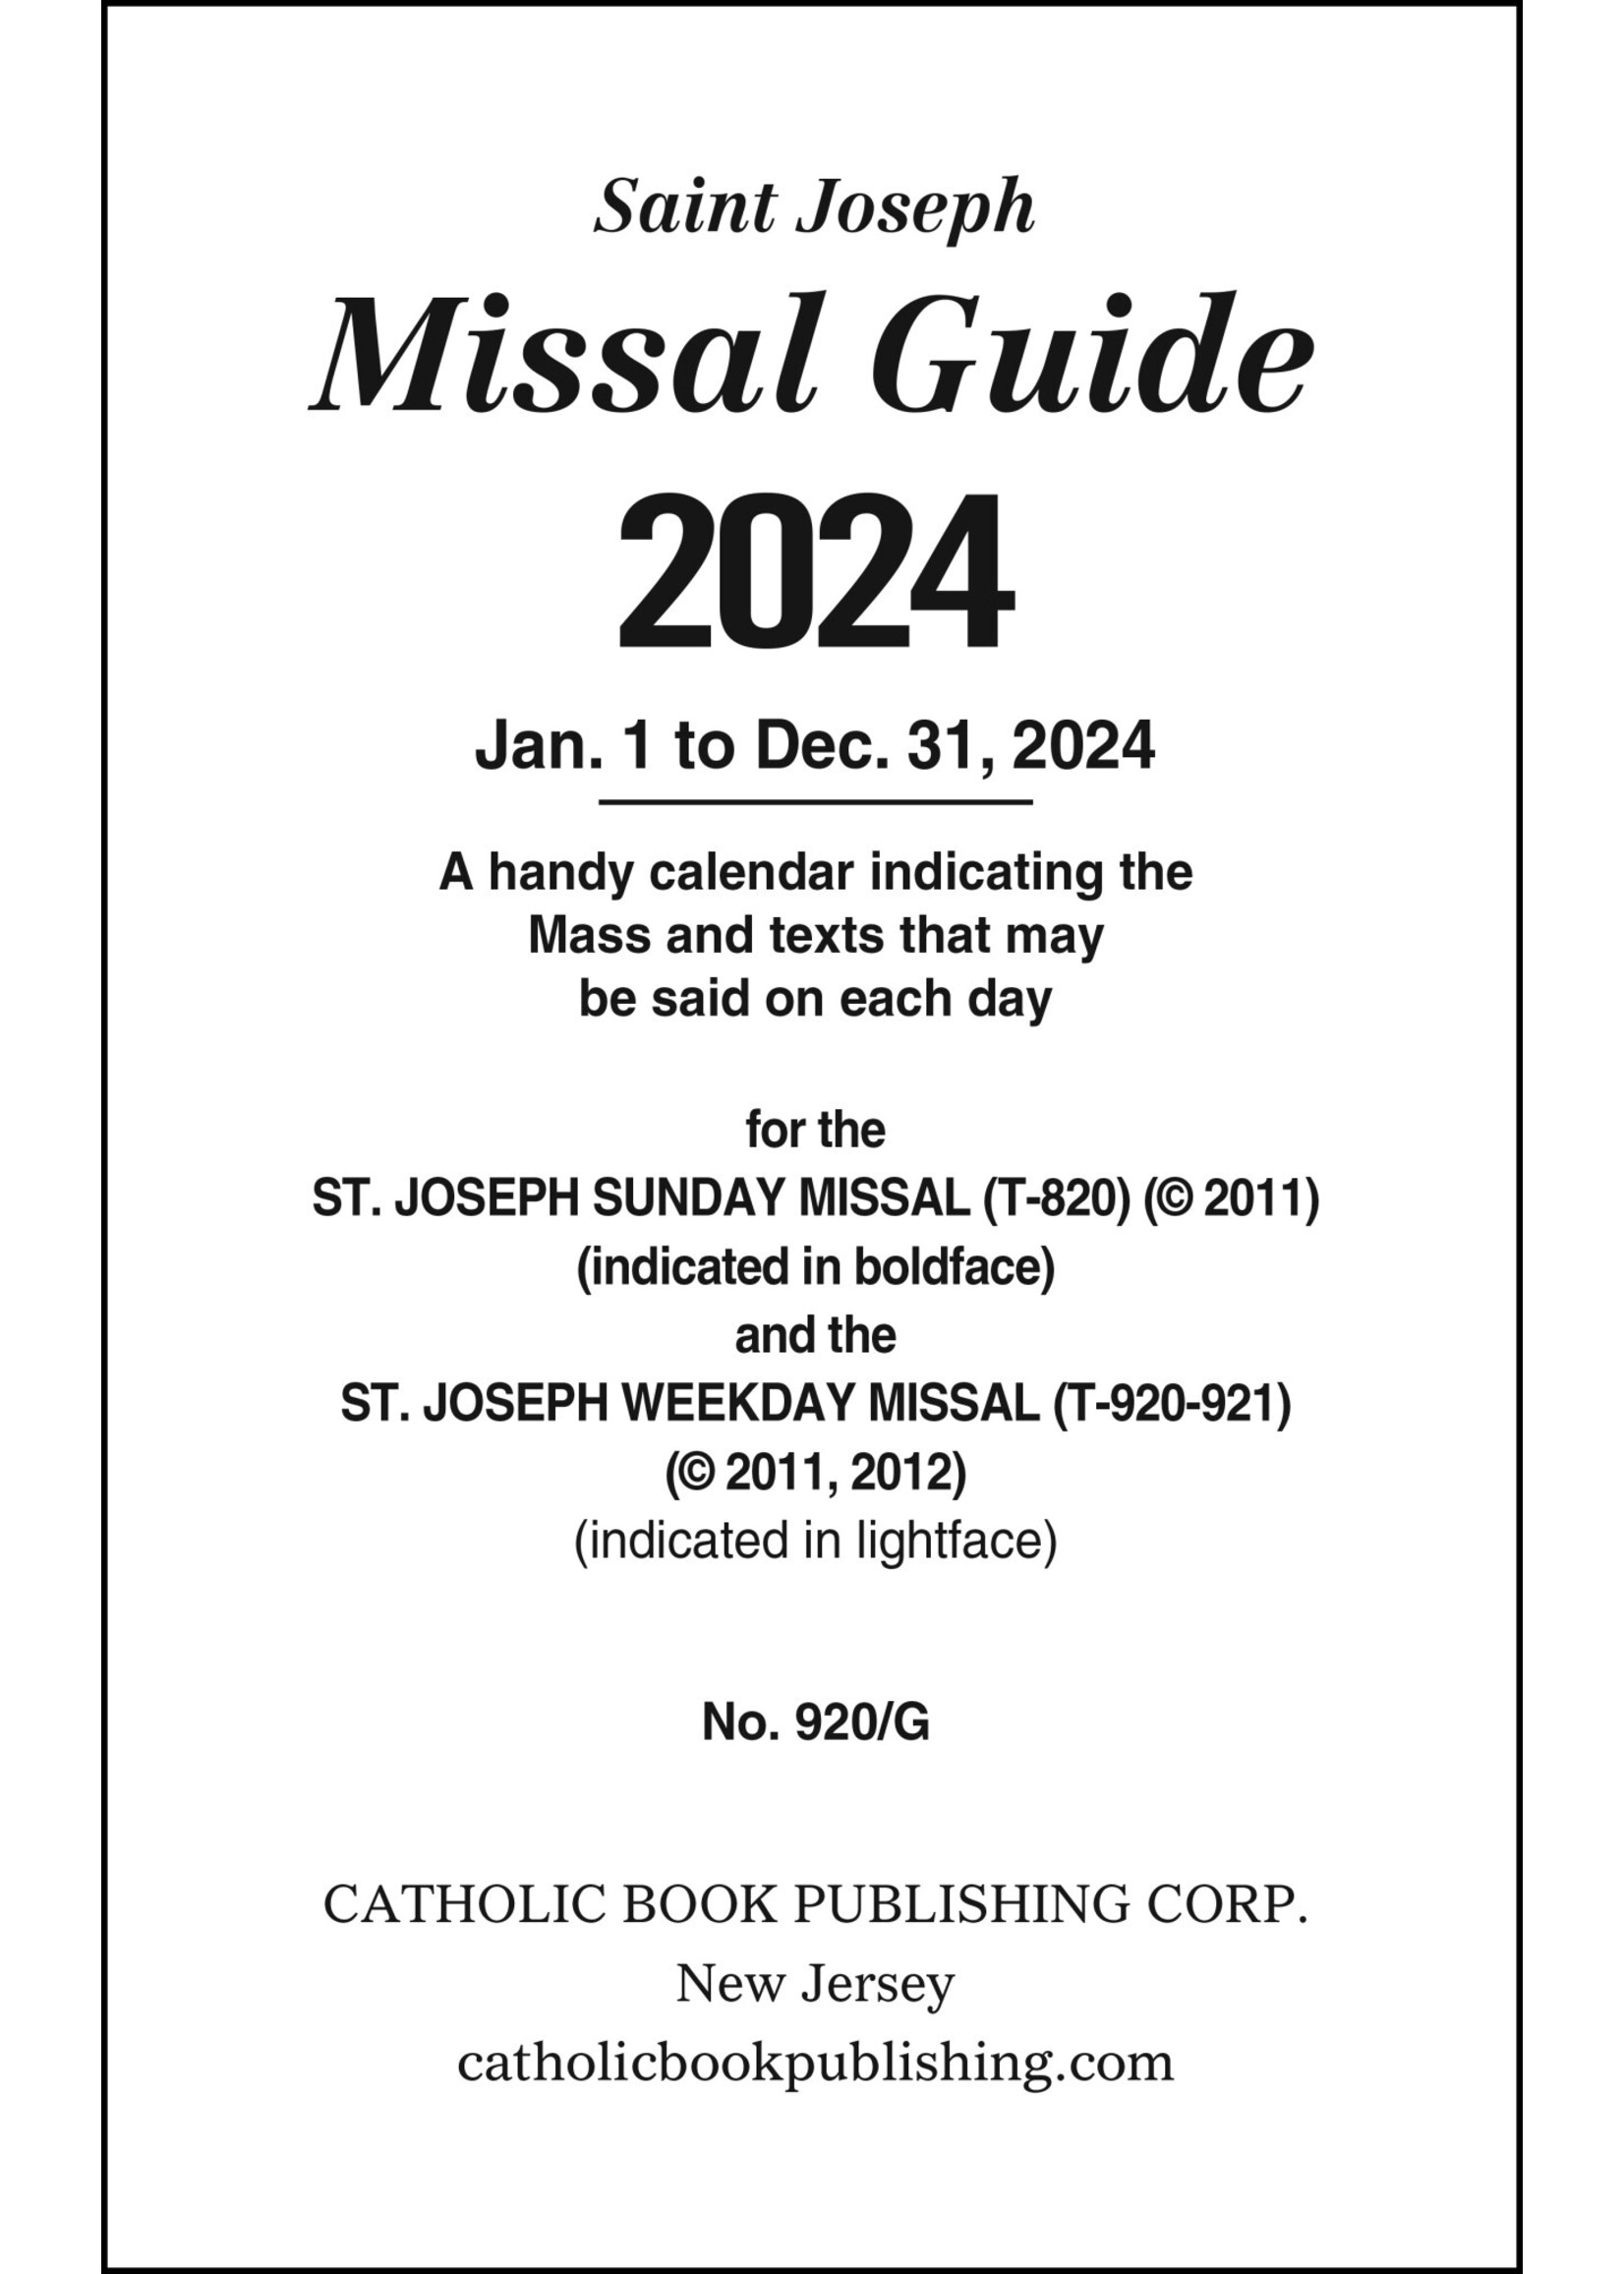 2024 Missal Guide